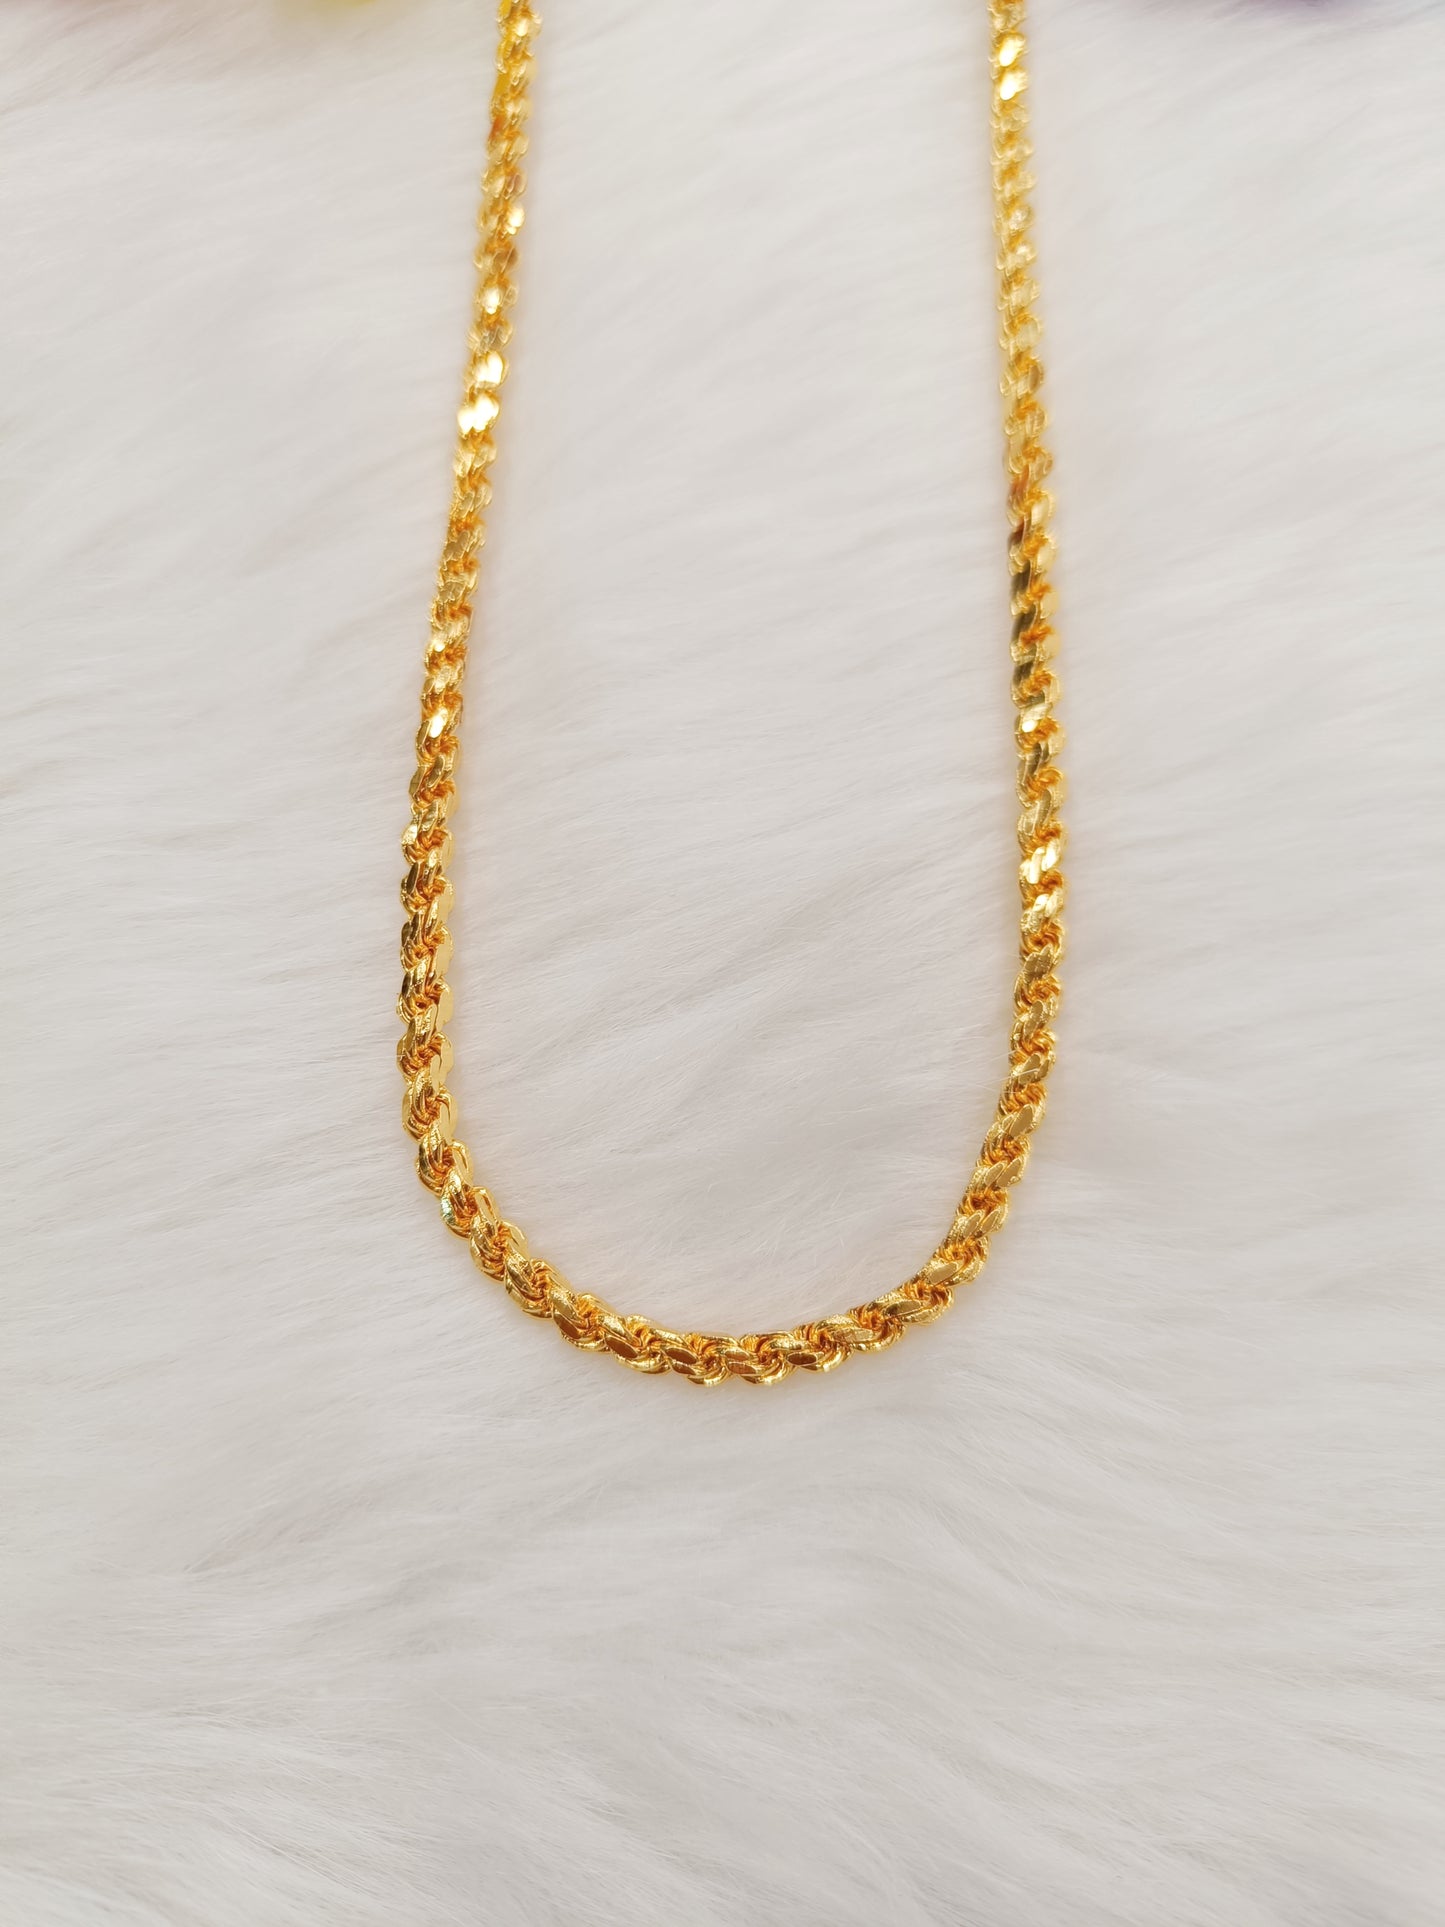 200 milligram Gold Plated Rope Chain